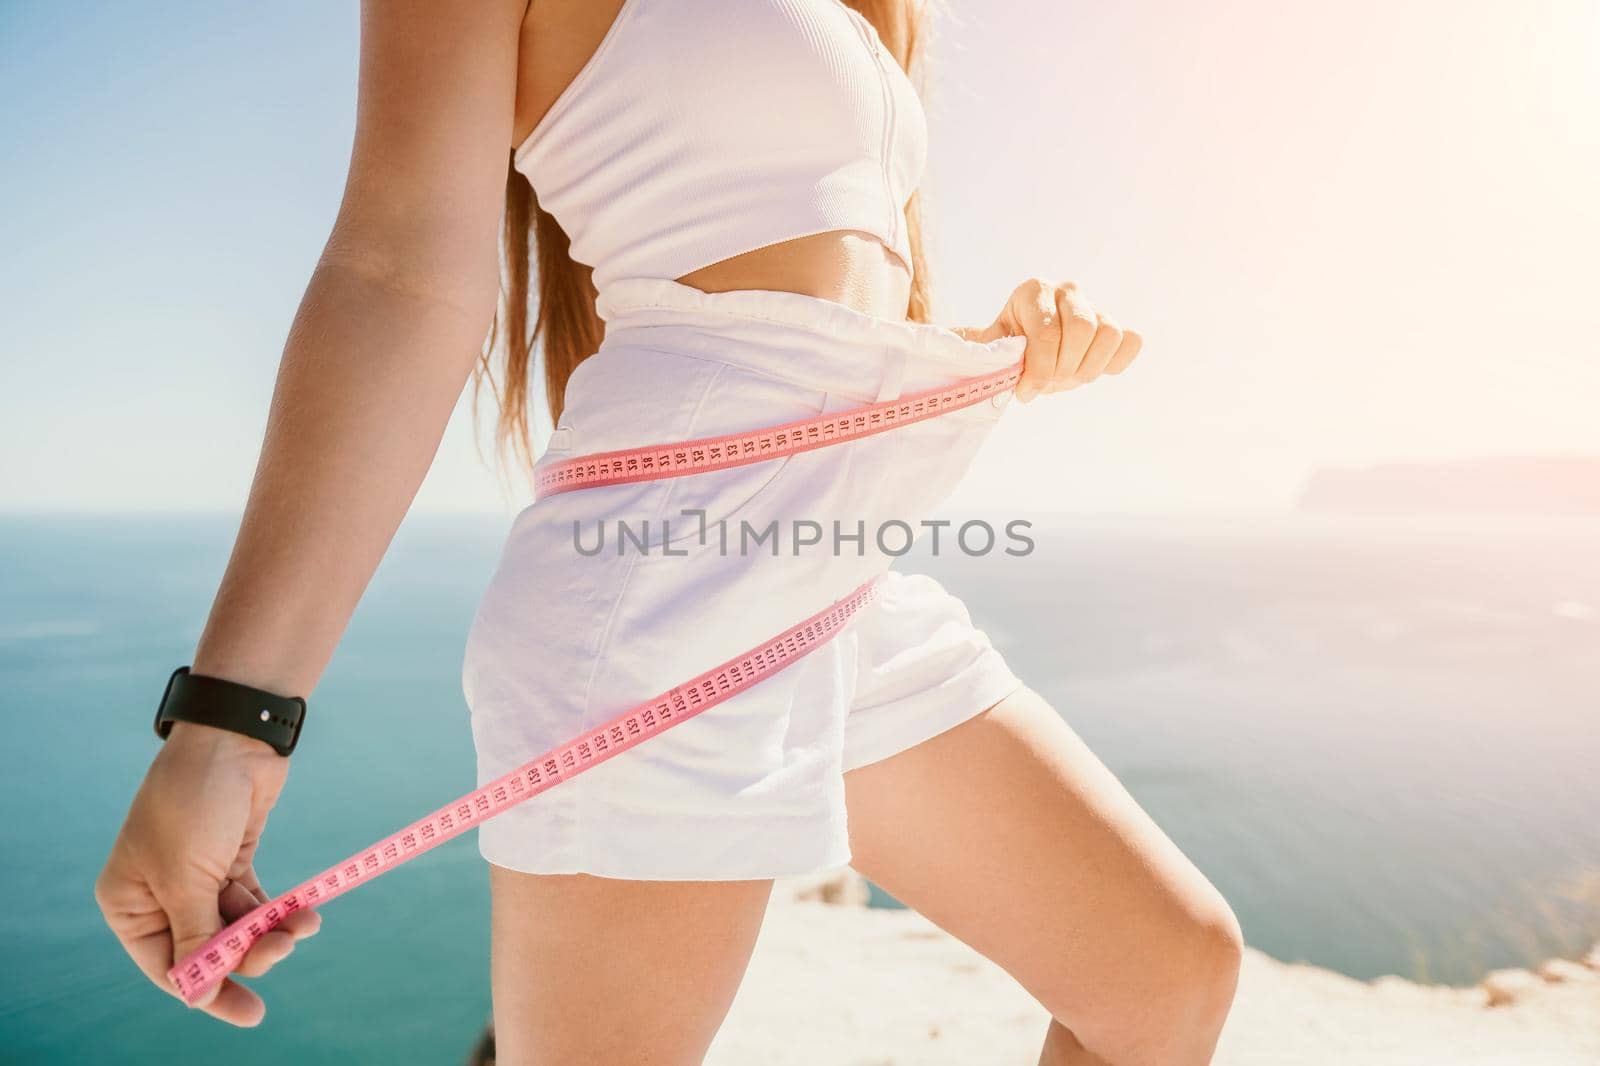 a young and slender woman in shorts holds in her hand a measuring yellow tape on her sexy thighs on the beach. concept of detox and diet